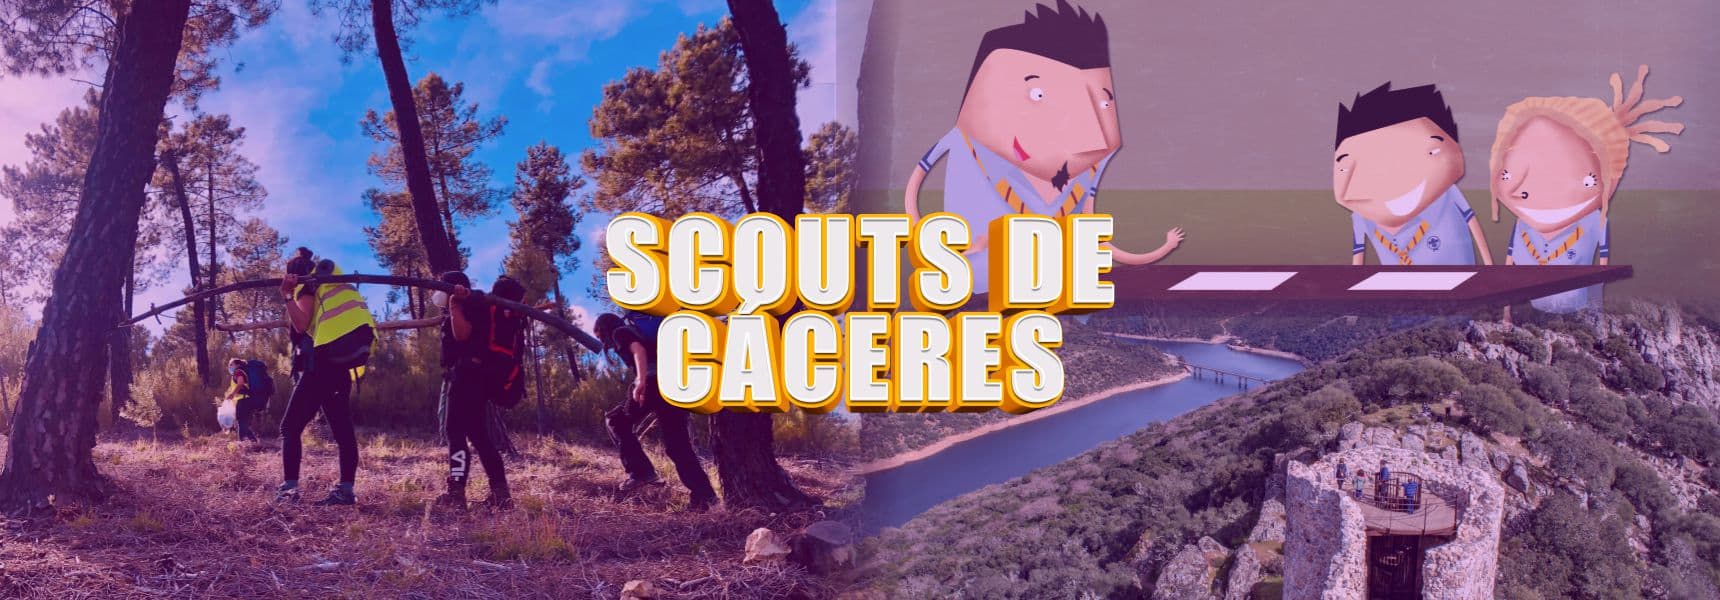 scouts-caceres-titulo-cabecera